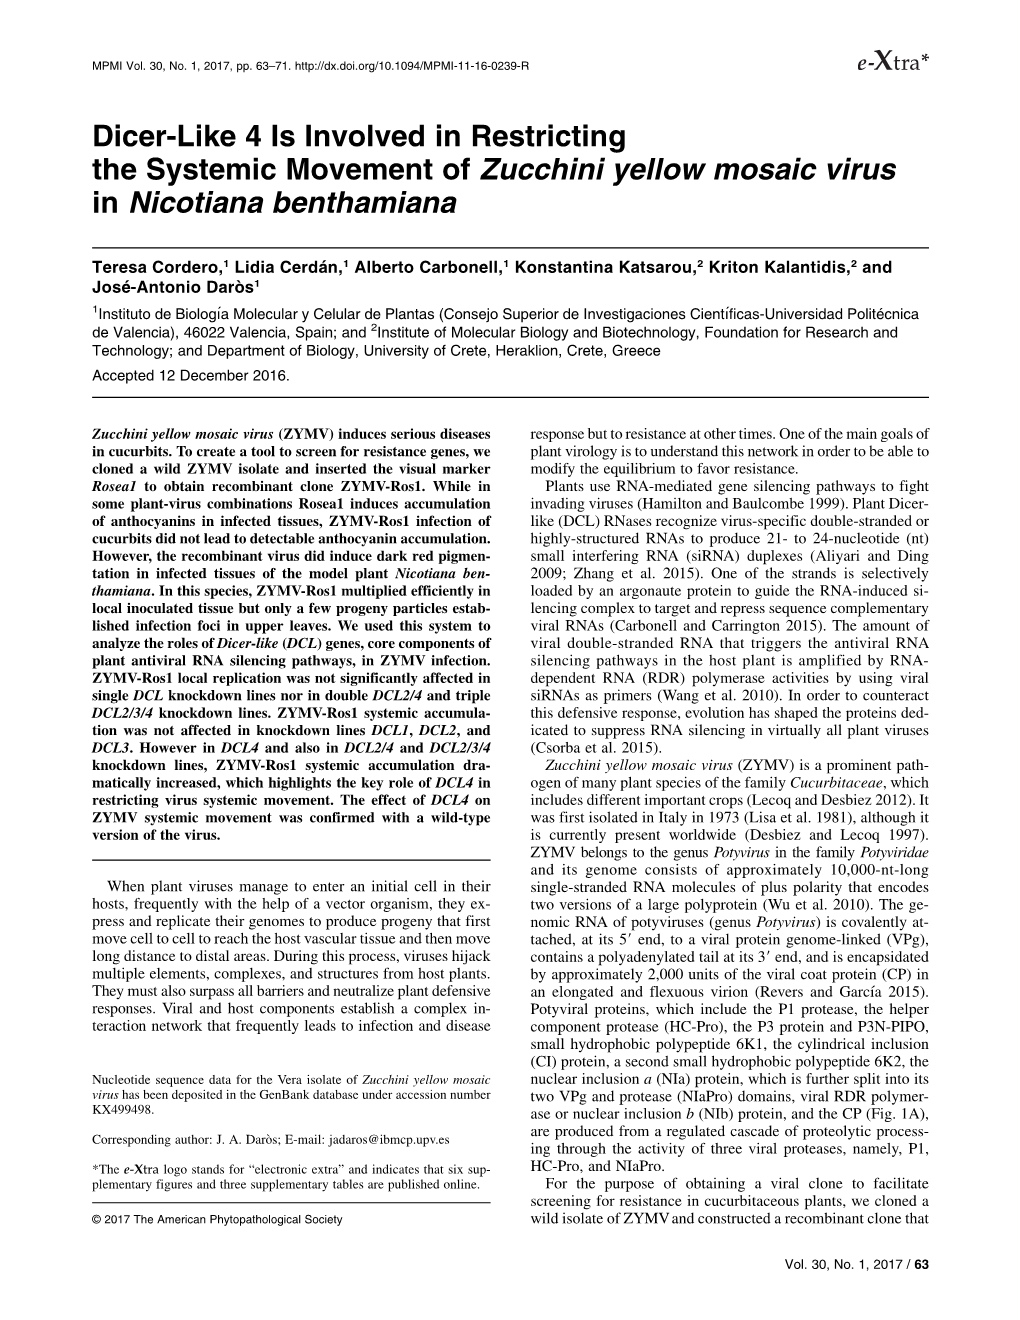 Dicer-Like 4 Is Involved in Restricting the Systemic Movement of Zucchini Yellow Mosaic Virus in Nicotiana Benthamiana